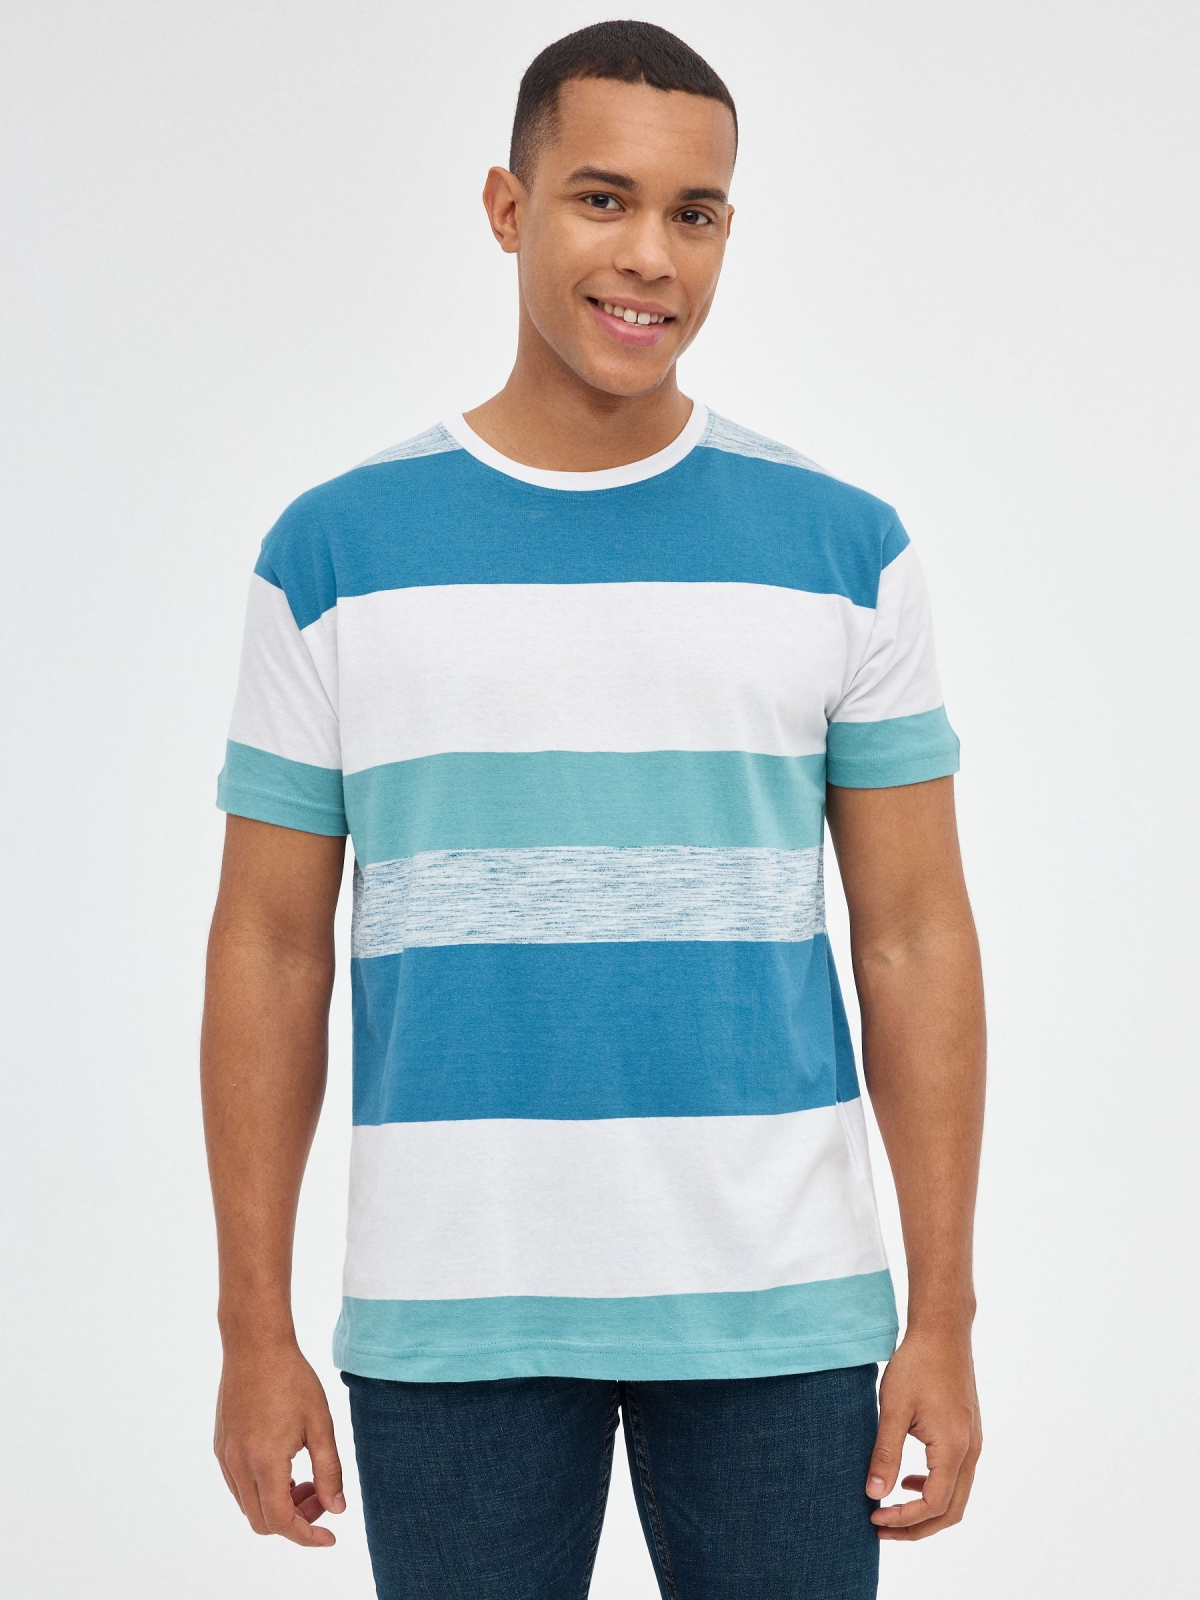 Striped printed T-shirt blue middle front view